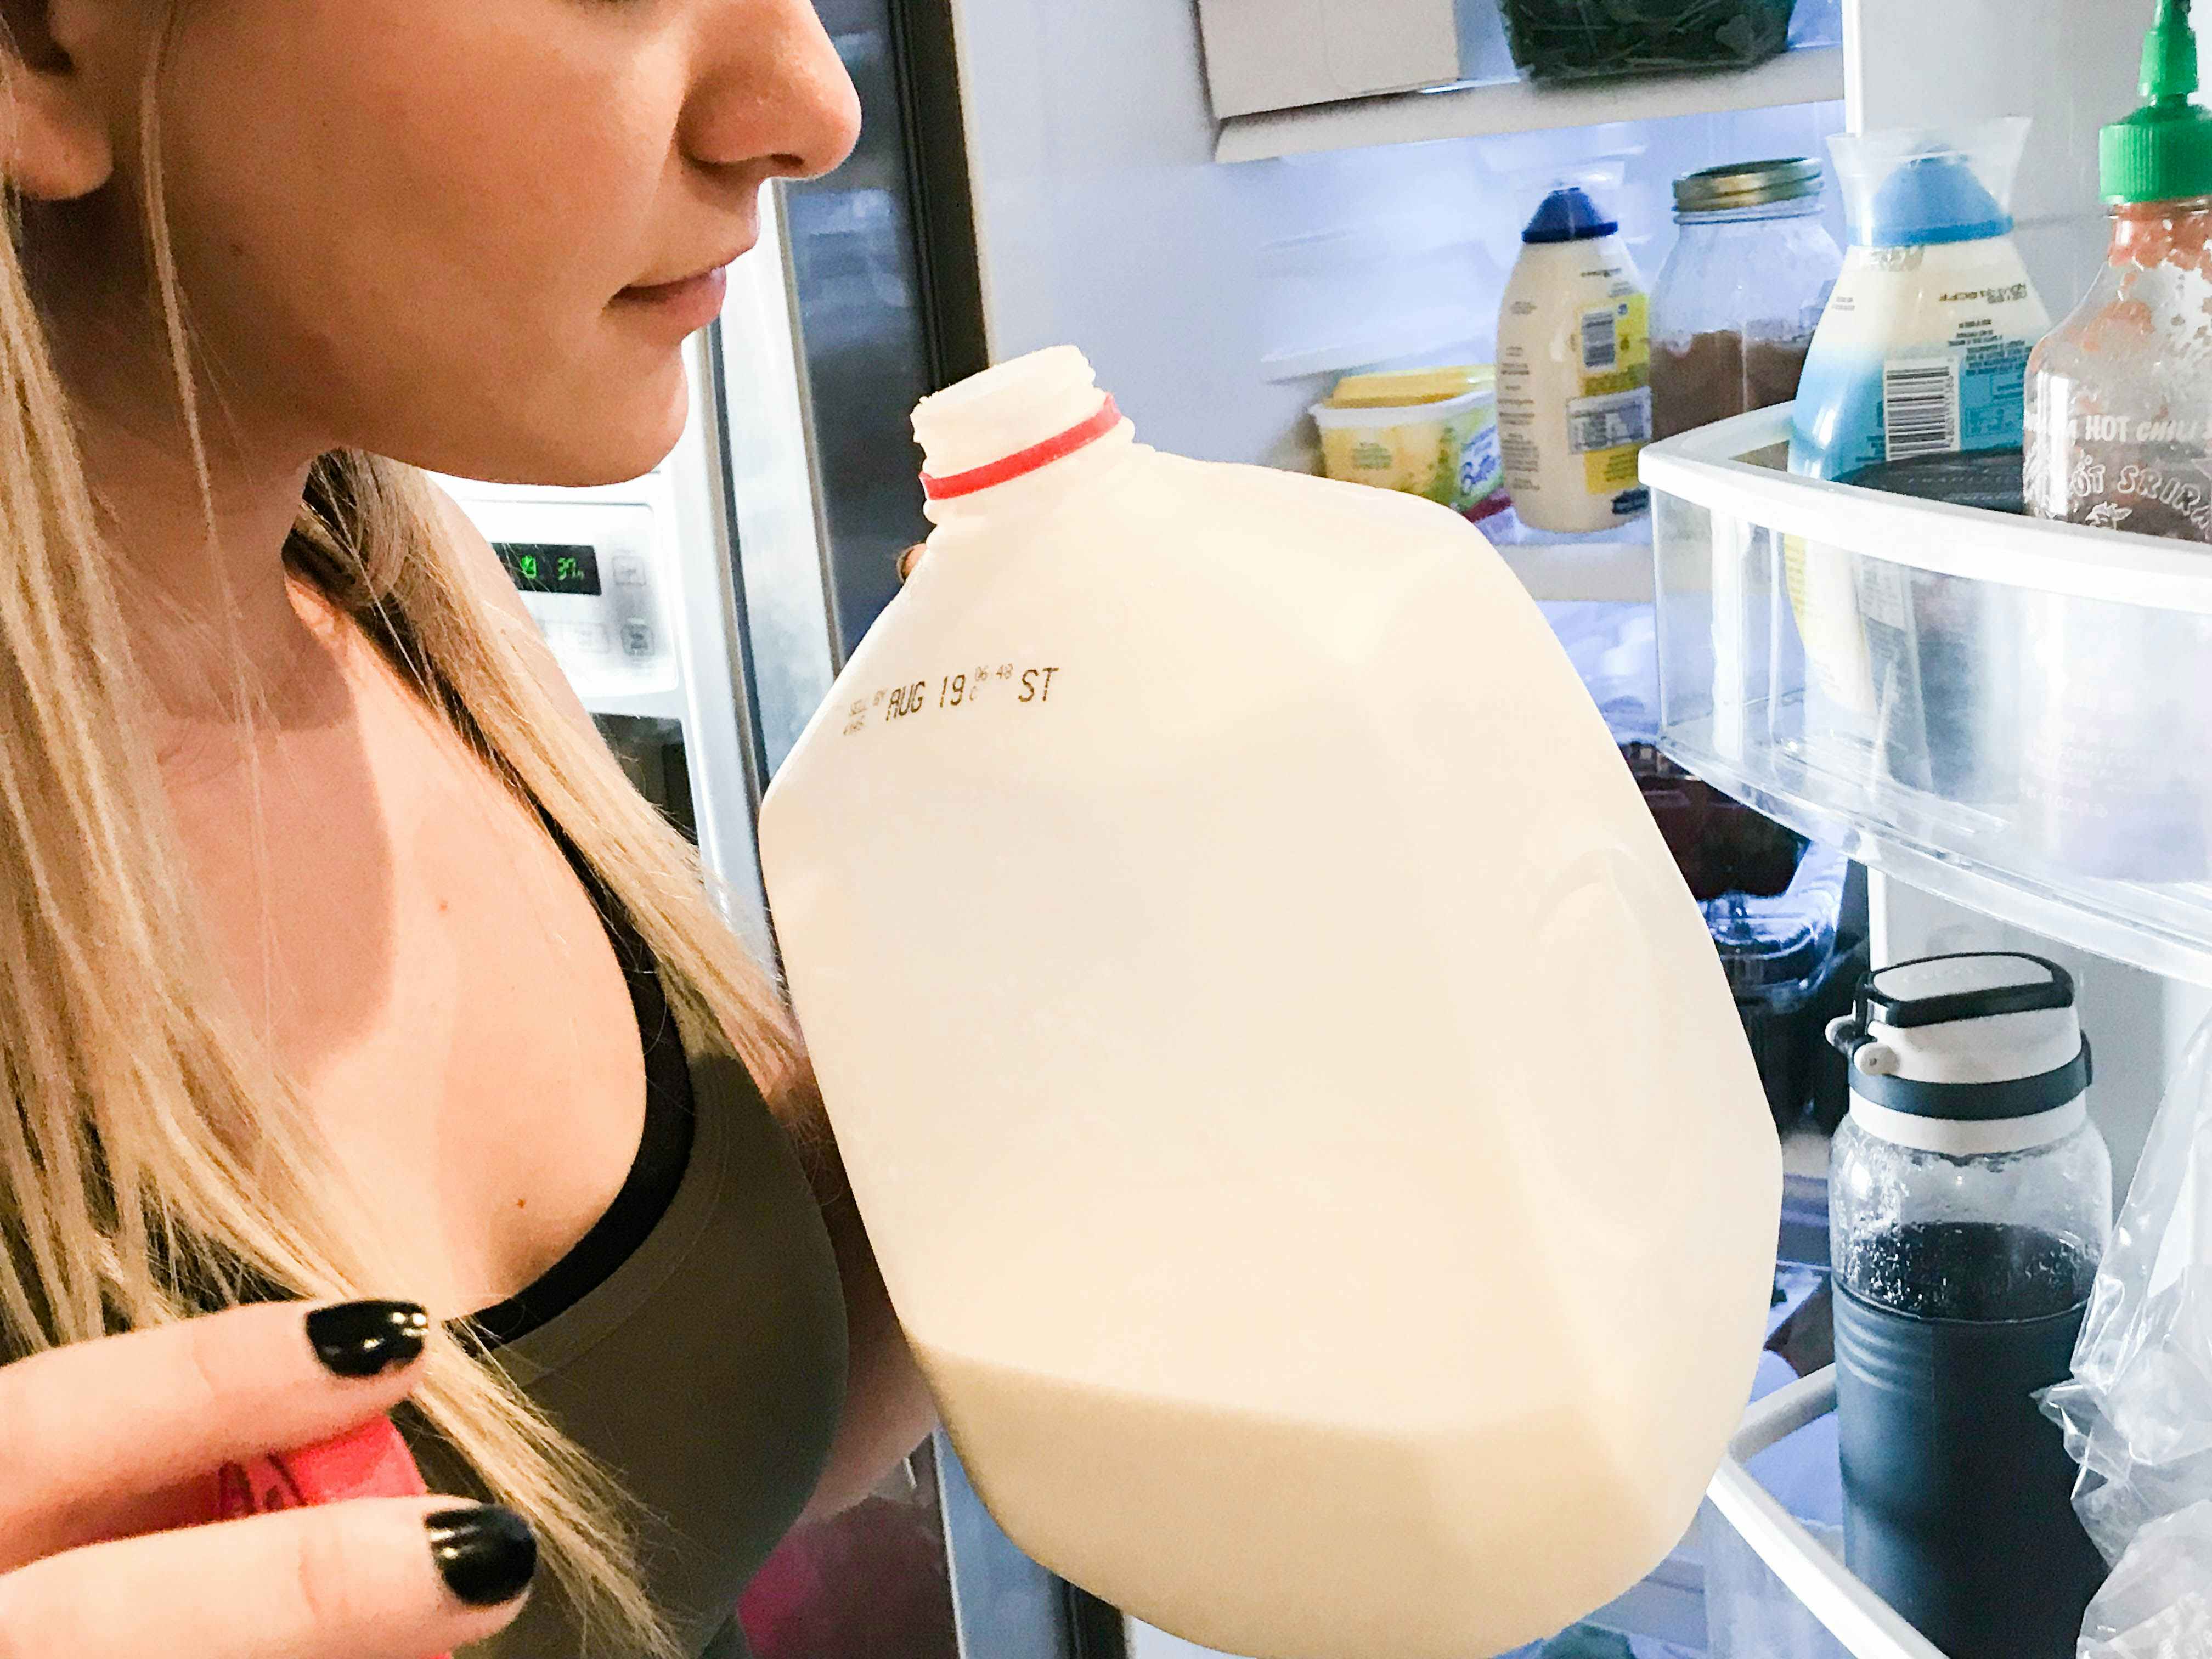 Woman sniffing an open gallon jug of milk.